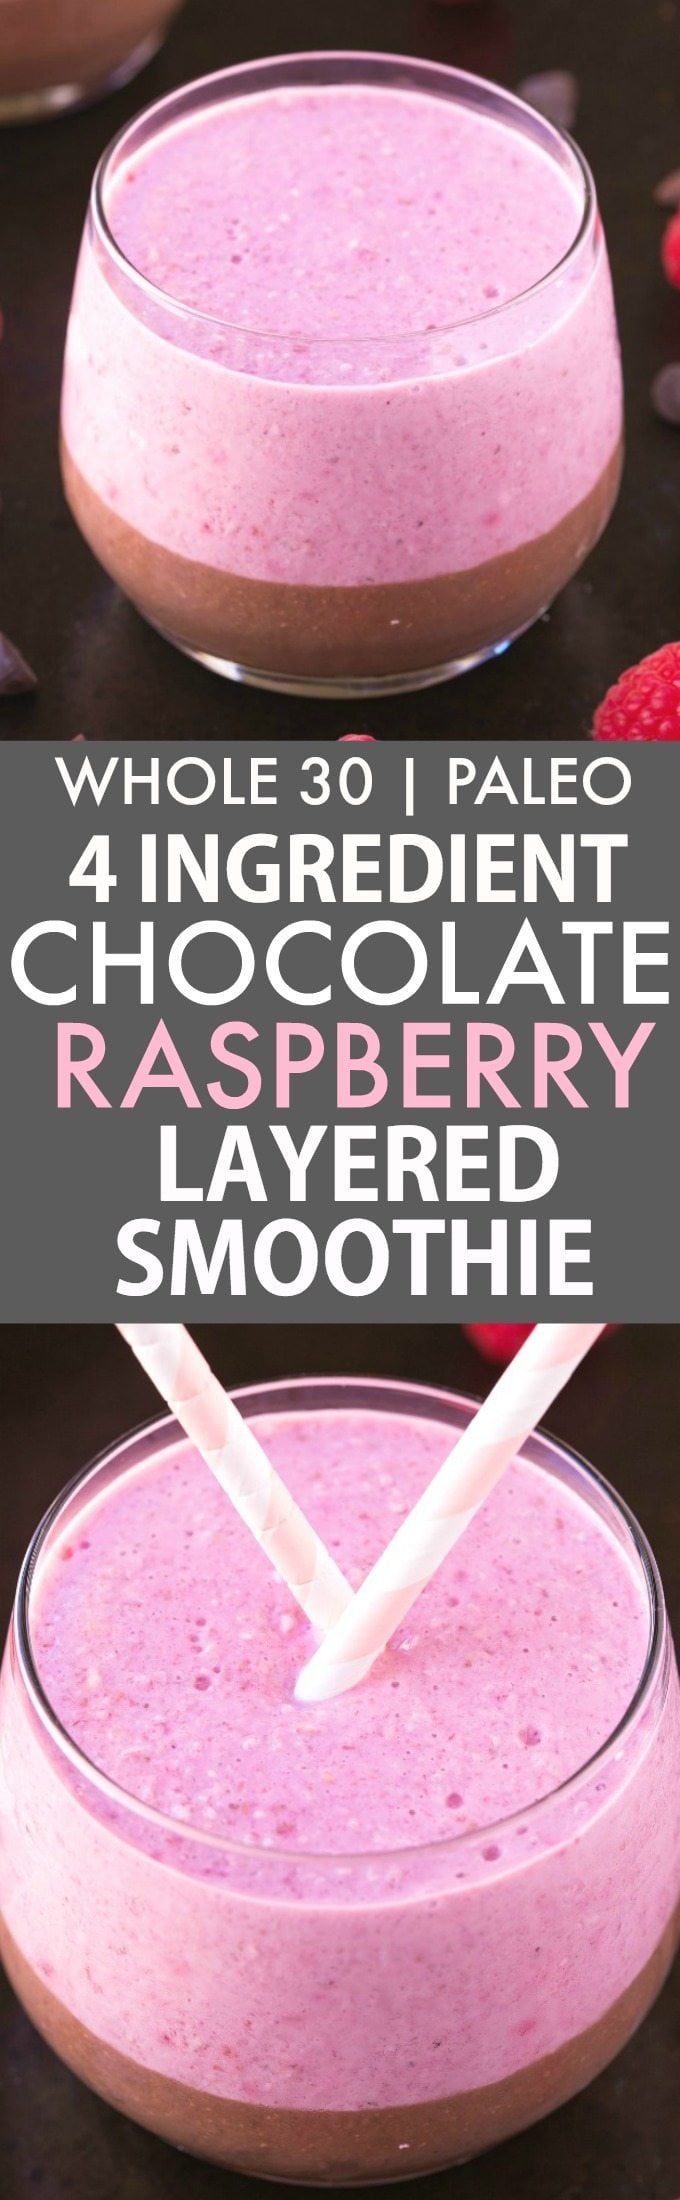 4 Ingredient Chocolate Raspberry Layered Breakfast Smoothie (Whole30, Paleo, V, GF)- Thick, creamy, protein and fiber packed breakfast smoothie LOADED with nutrients to keep you satisfied for hours! Filling, easy and sugar free! {whole 30, paleo, vegan, gluten free recipe}- thebigmansworld.com